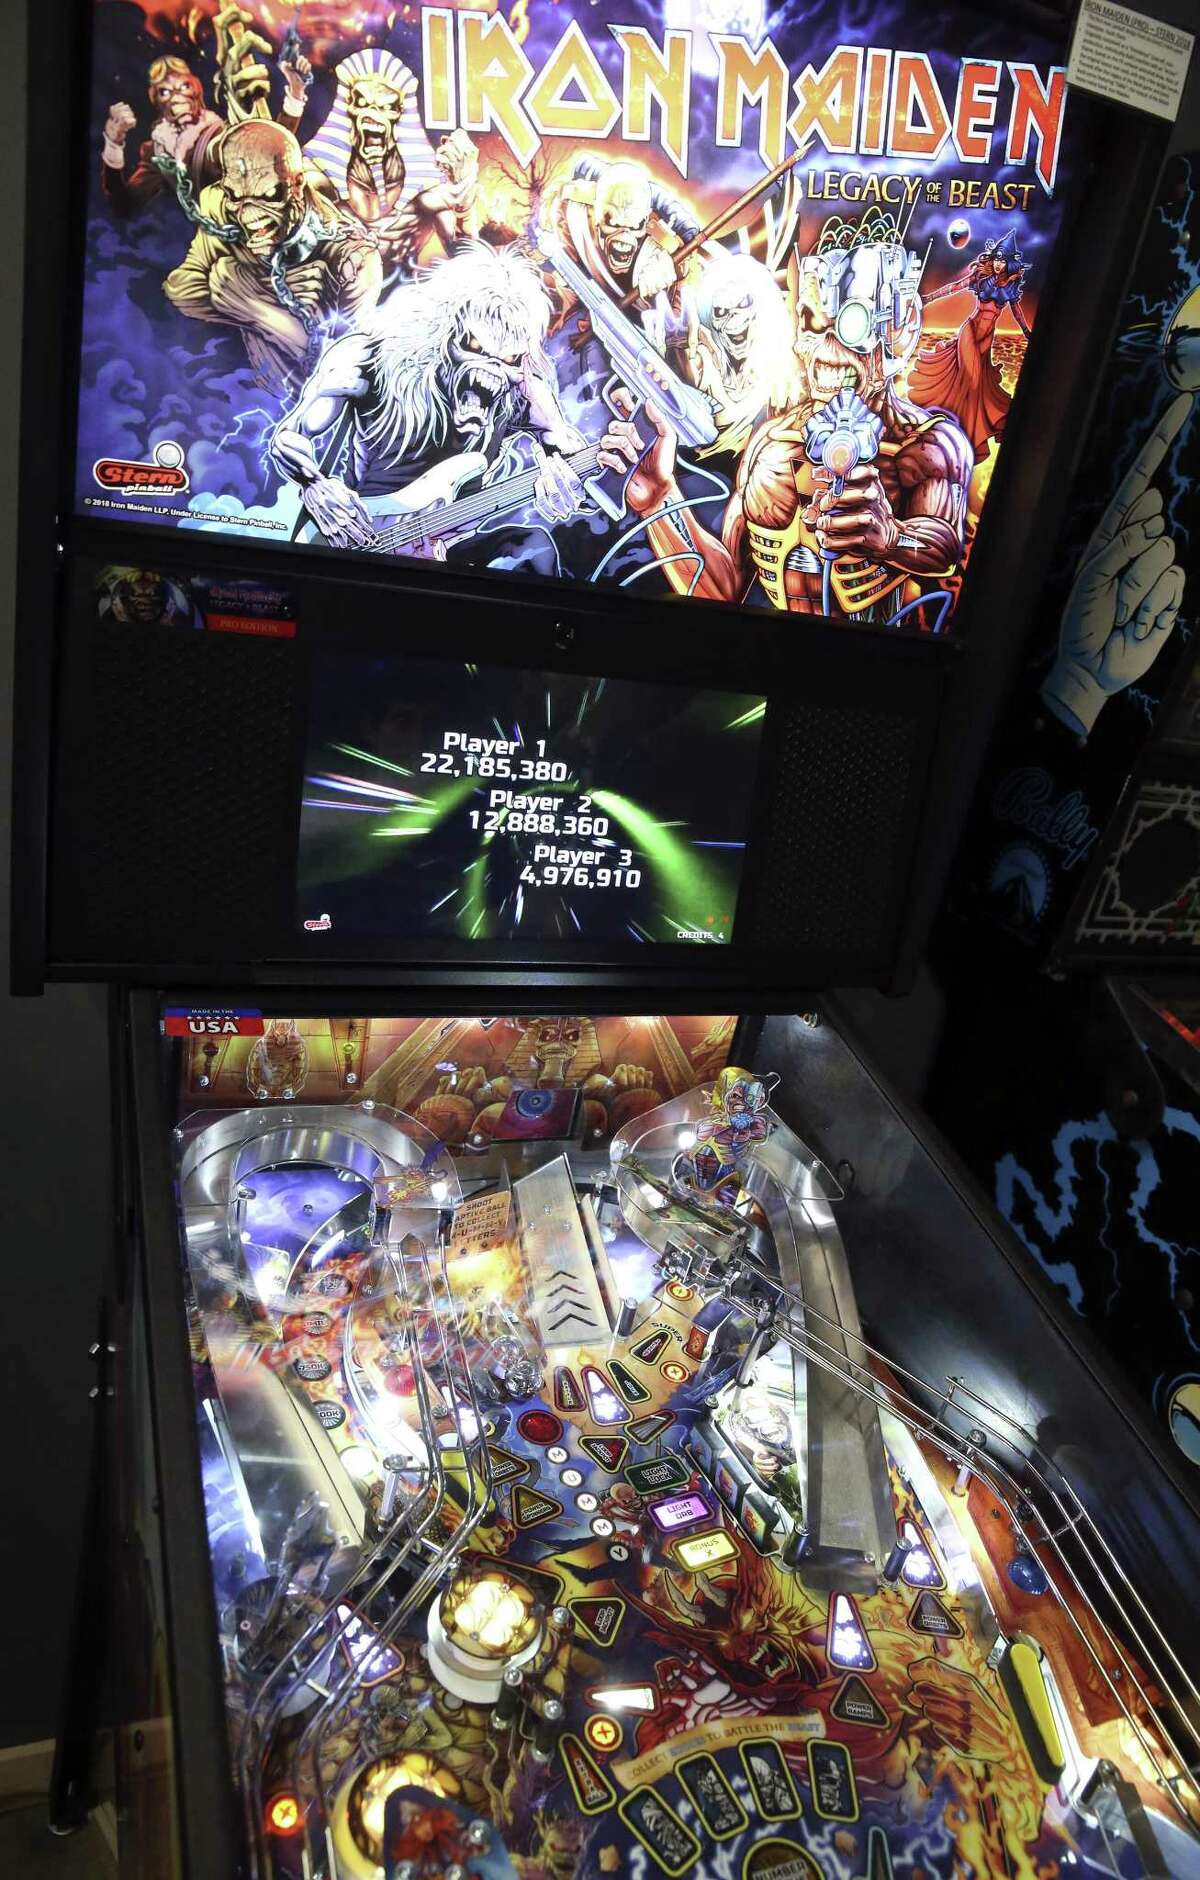 What's Brewing? coffeehouse hosts various pinball machines, from the 1970s to 2018 with its Iron Maiden pinball game.